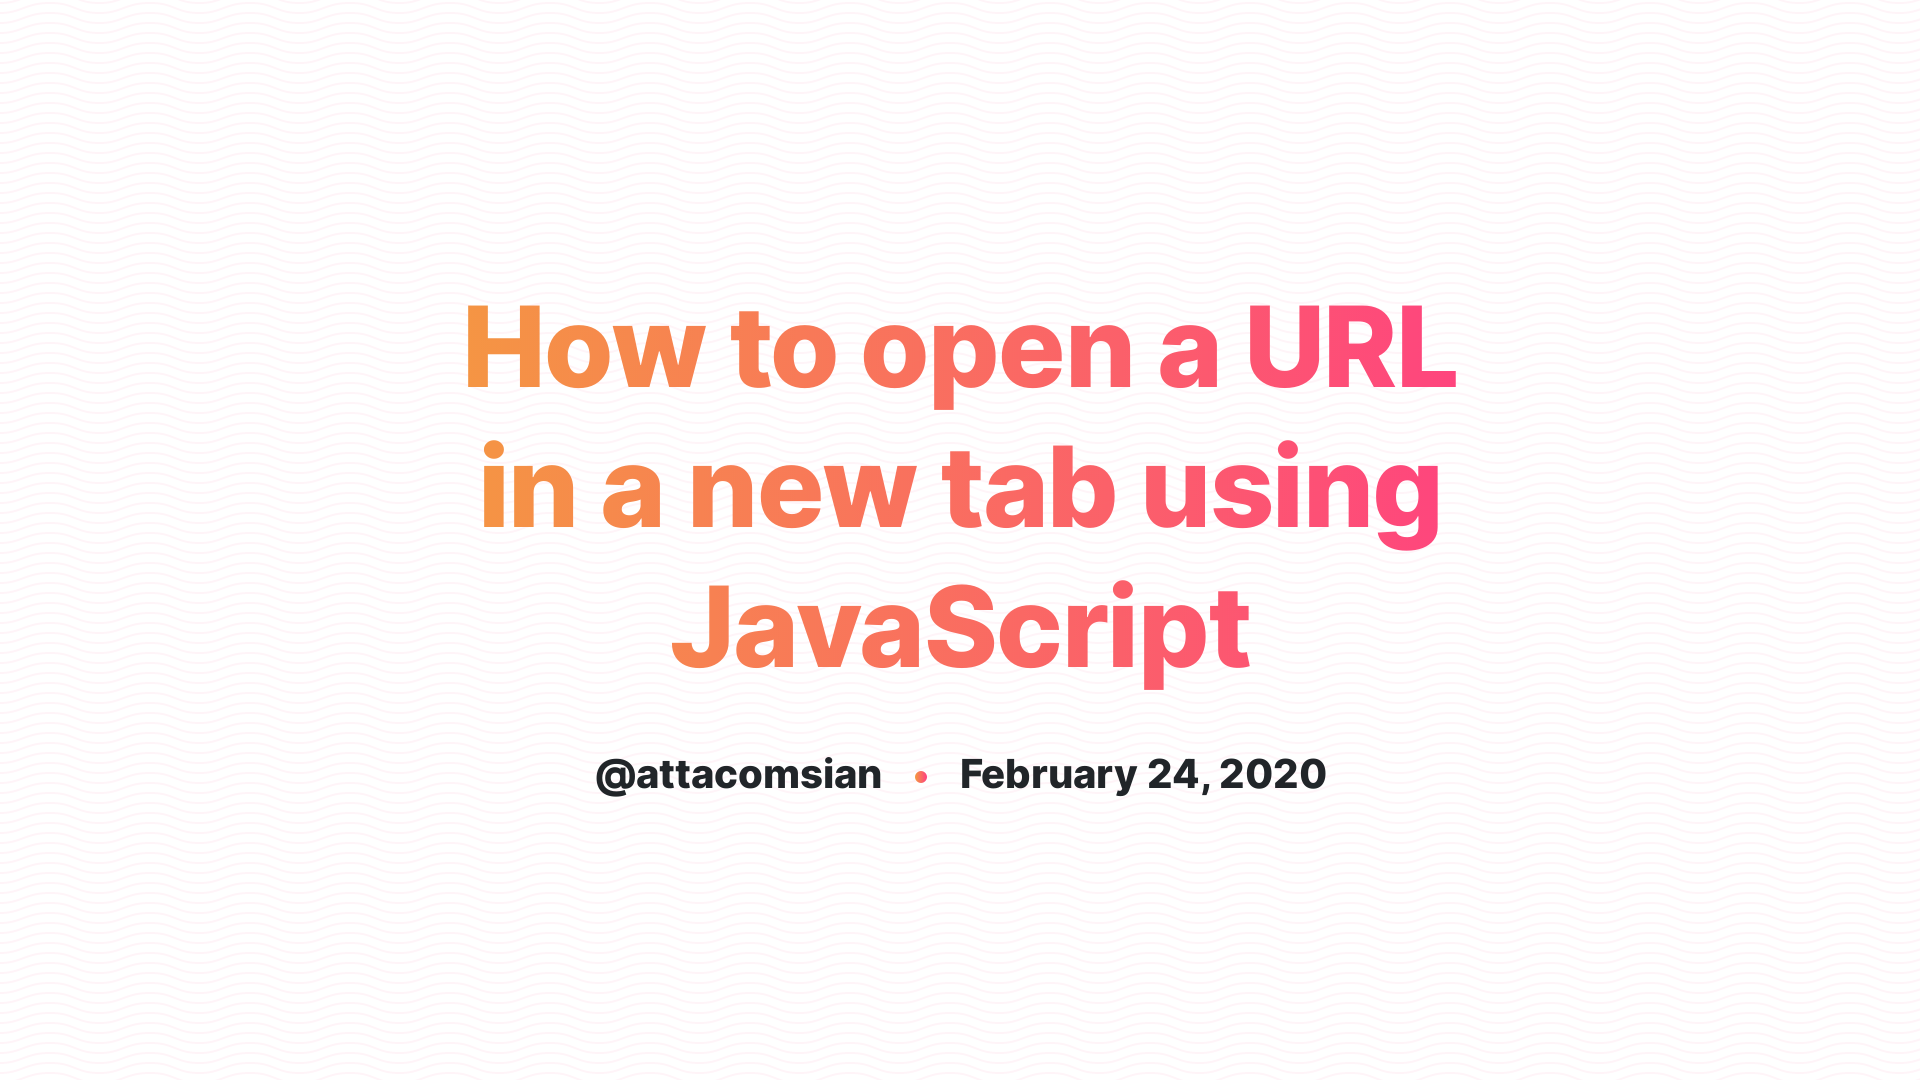 How to open a URL in a new tab using JavaScript